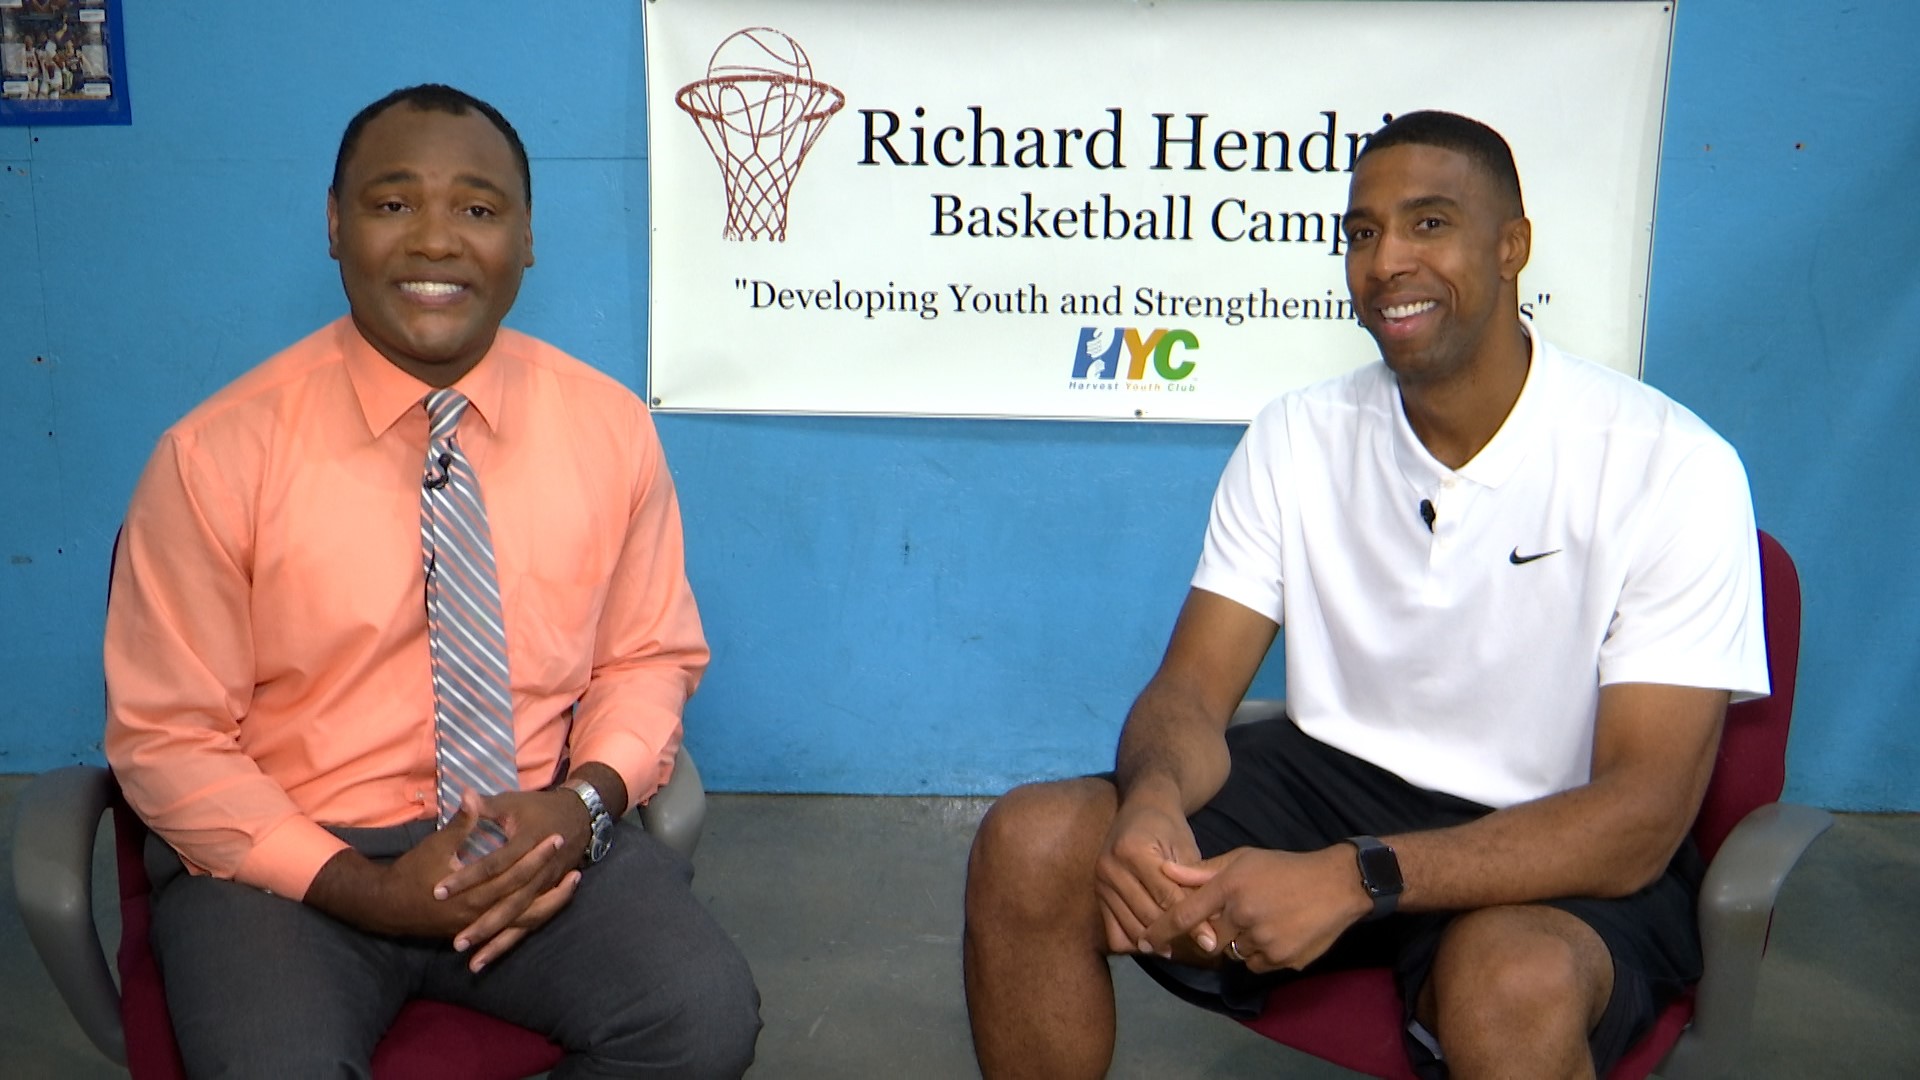 Athens High School Alumnus and former University of Alabama basketball standout Richard Hendrix spoke with Mo Carter on another edition of the Sunday Sitdown.